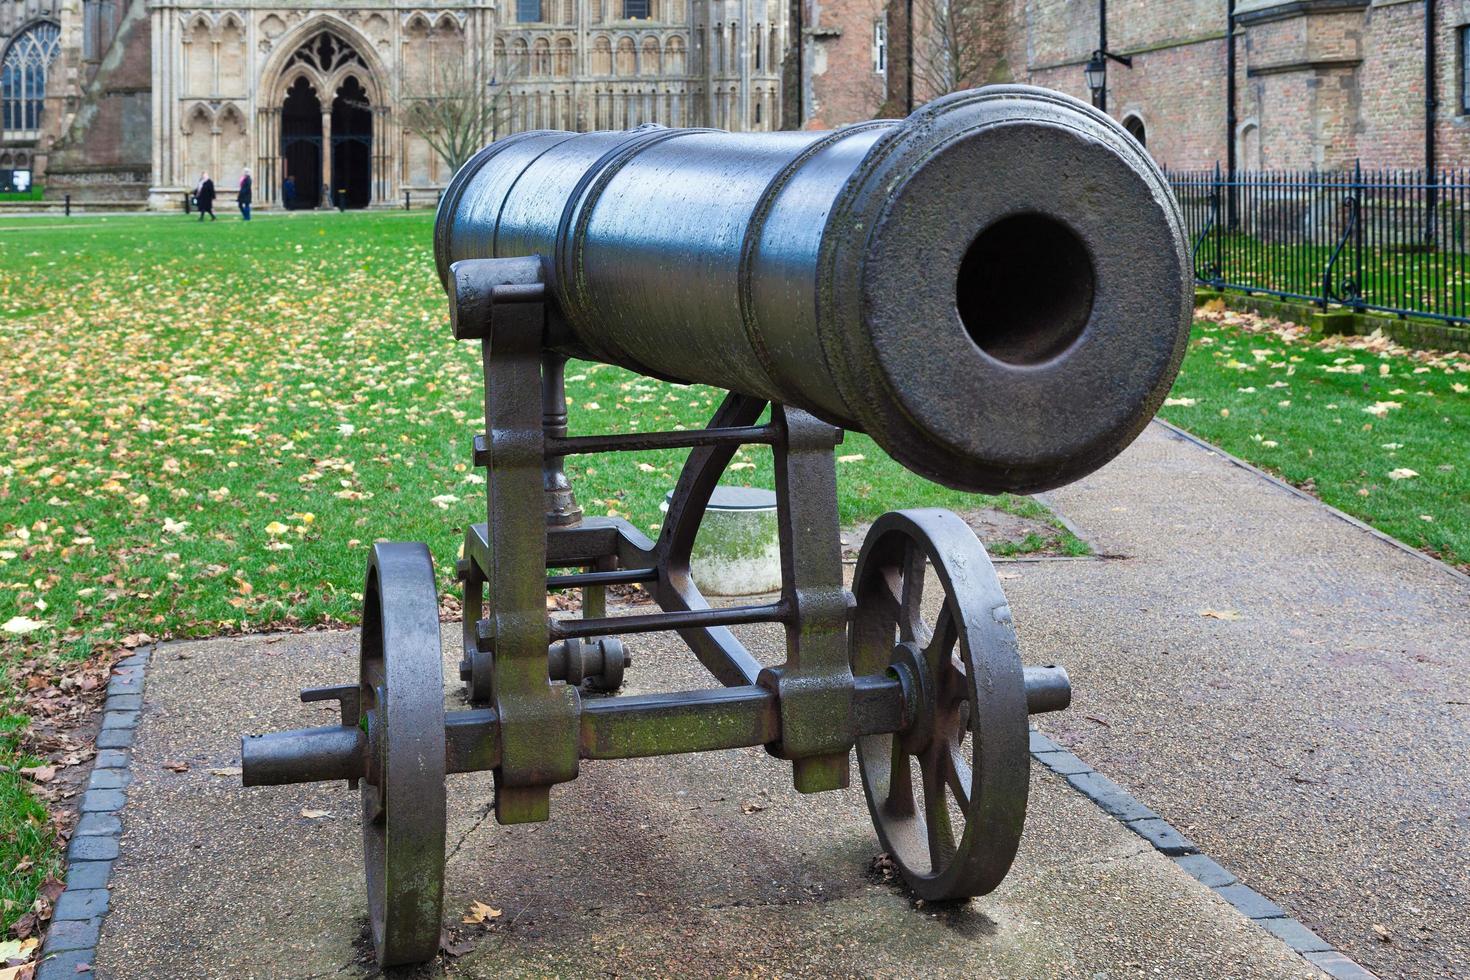 ELY, CAMBRIDGESHIRE, UK - NOVEMBER 22. Cannon outside Ely Cathedral in Ely on November 22, 2012. Three unidentified people photo